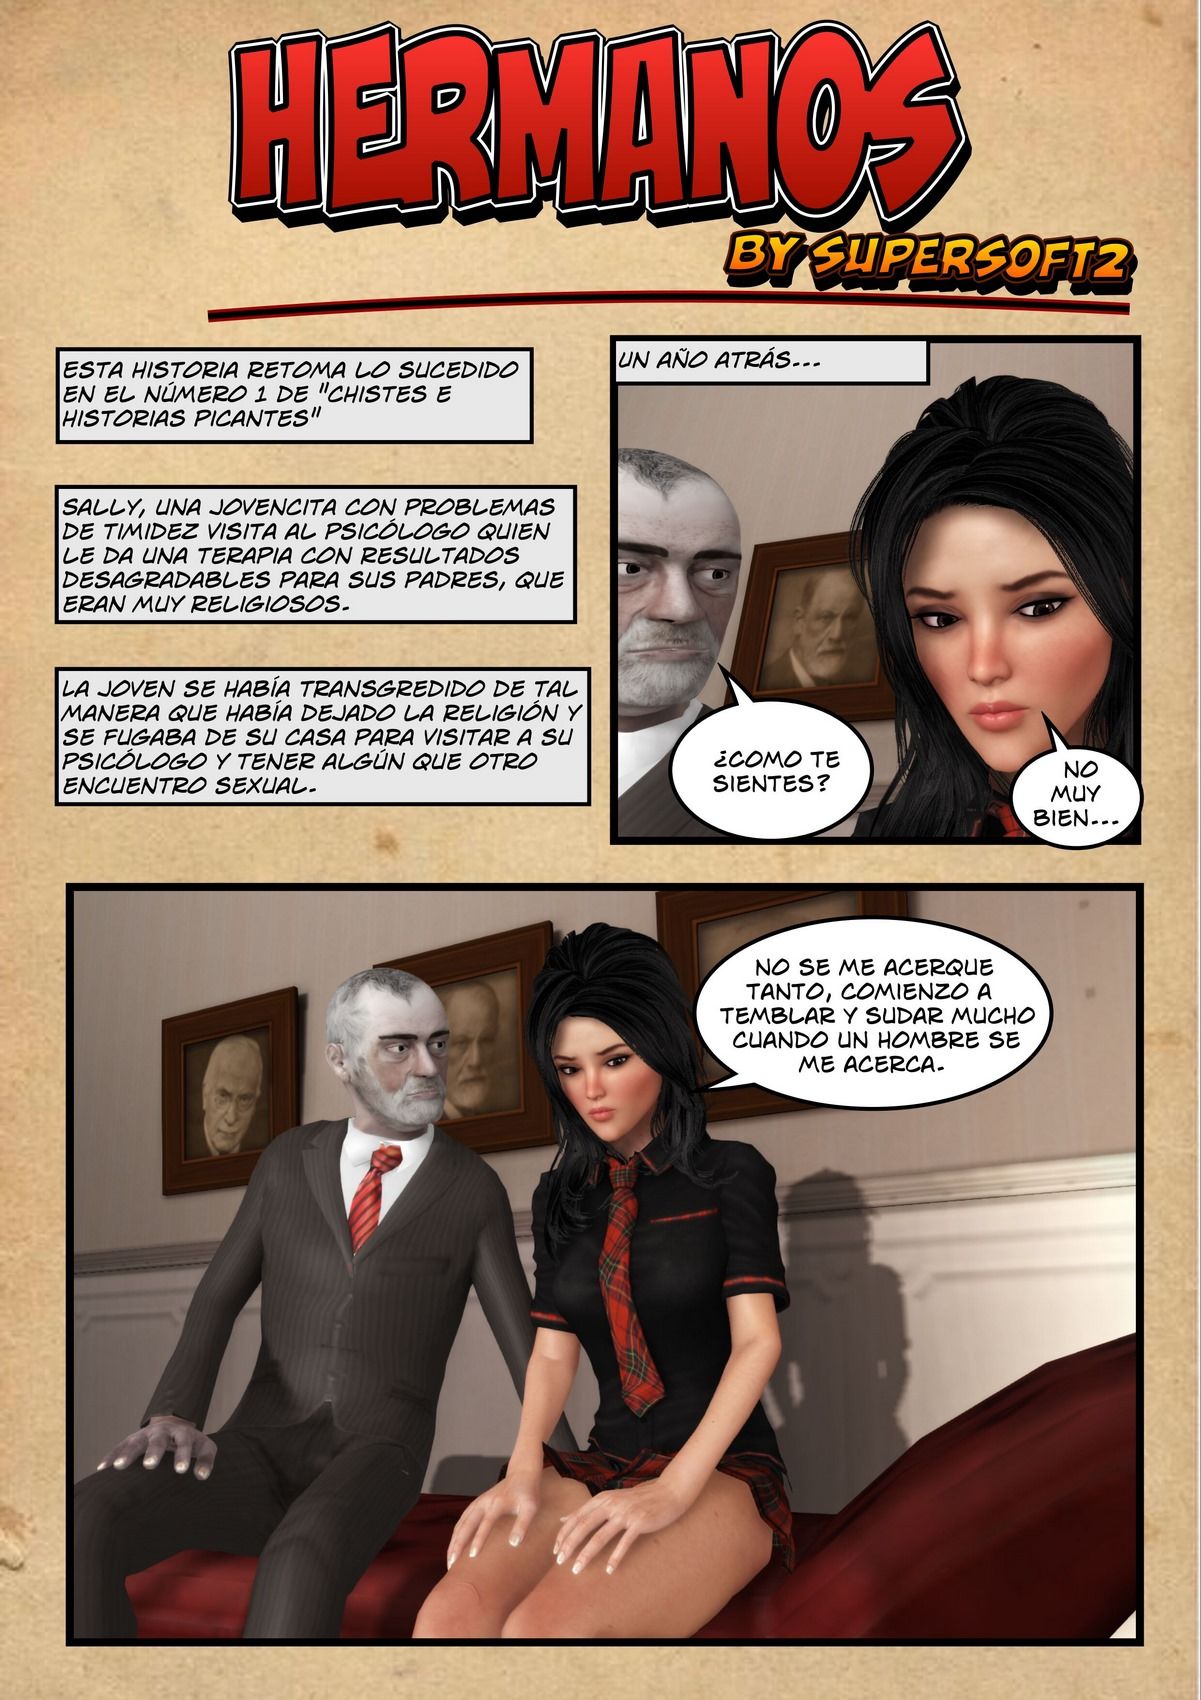 Hermanos by Supersoft2 page 1